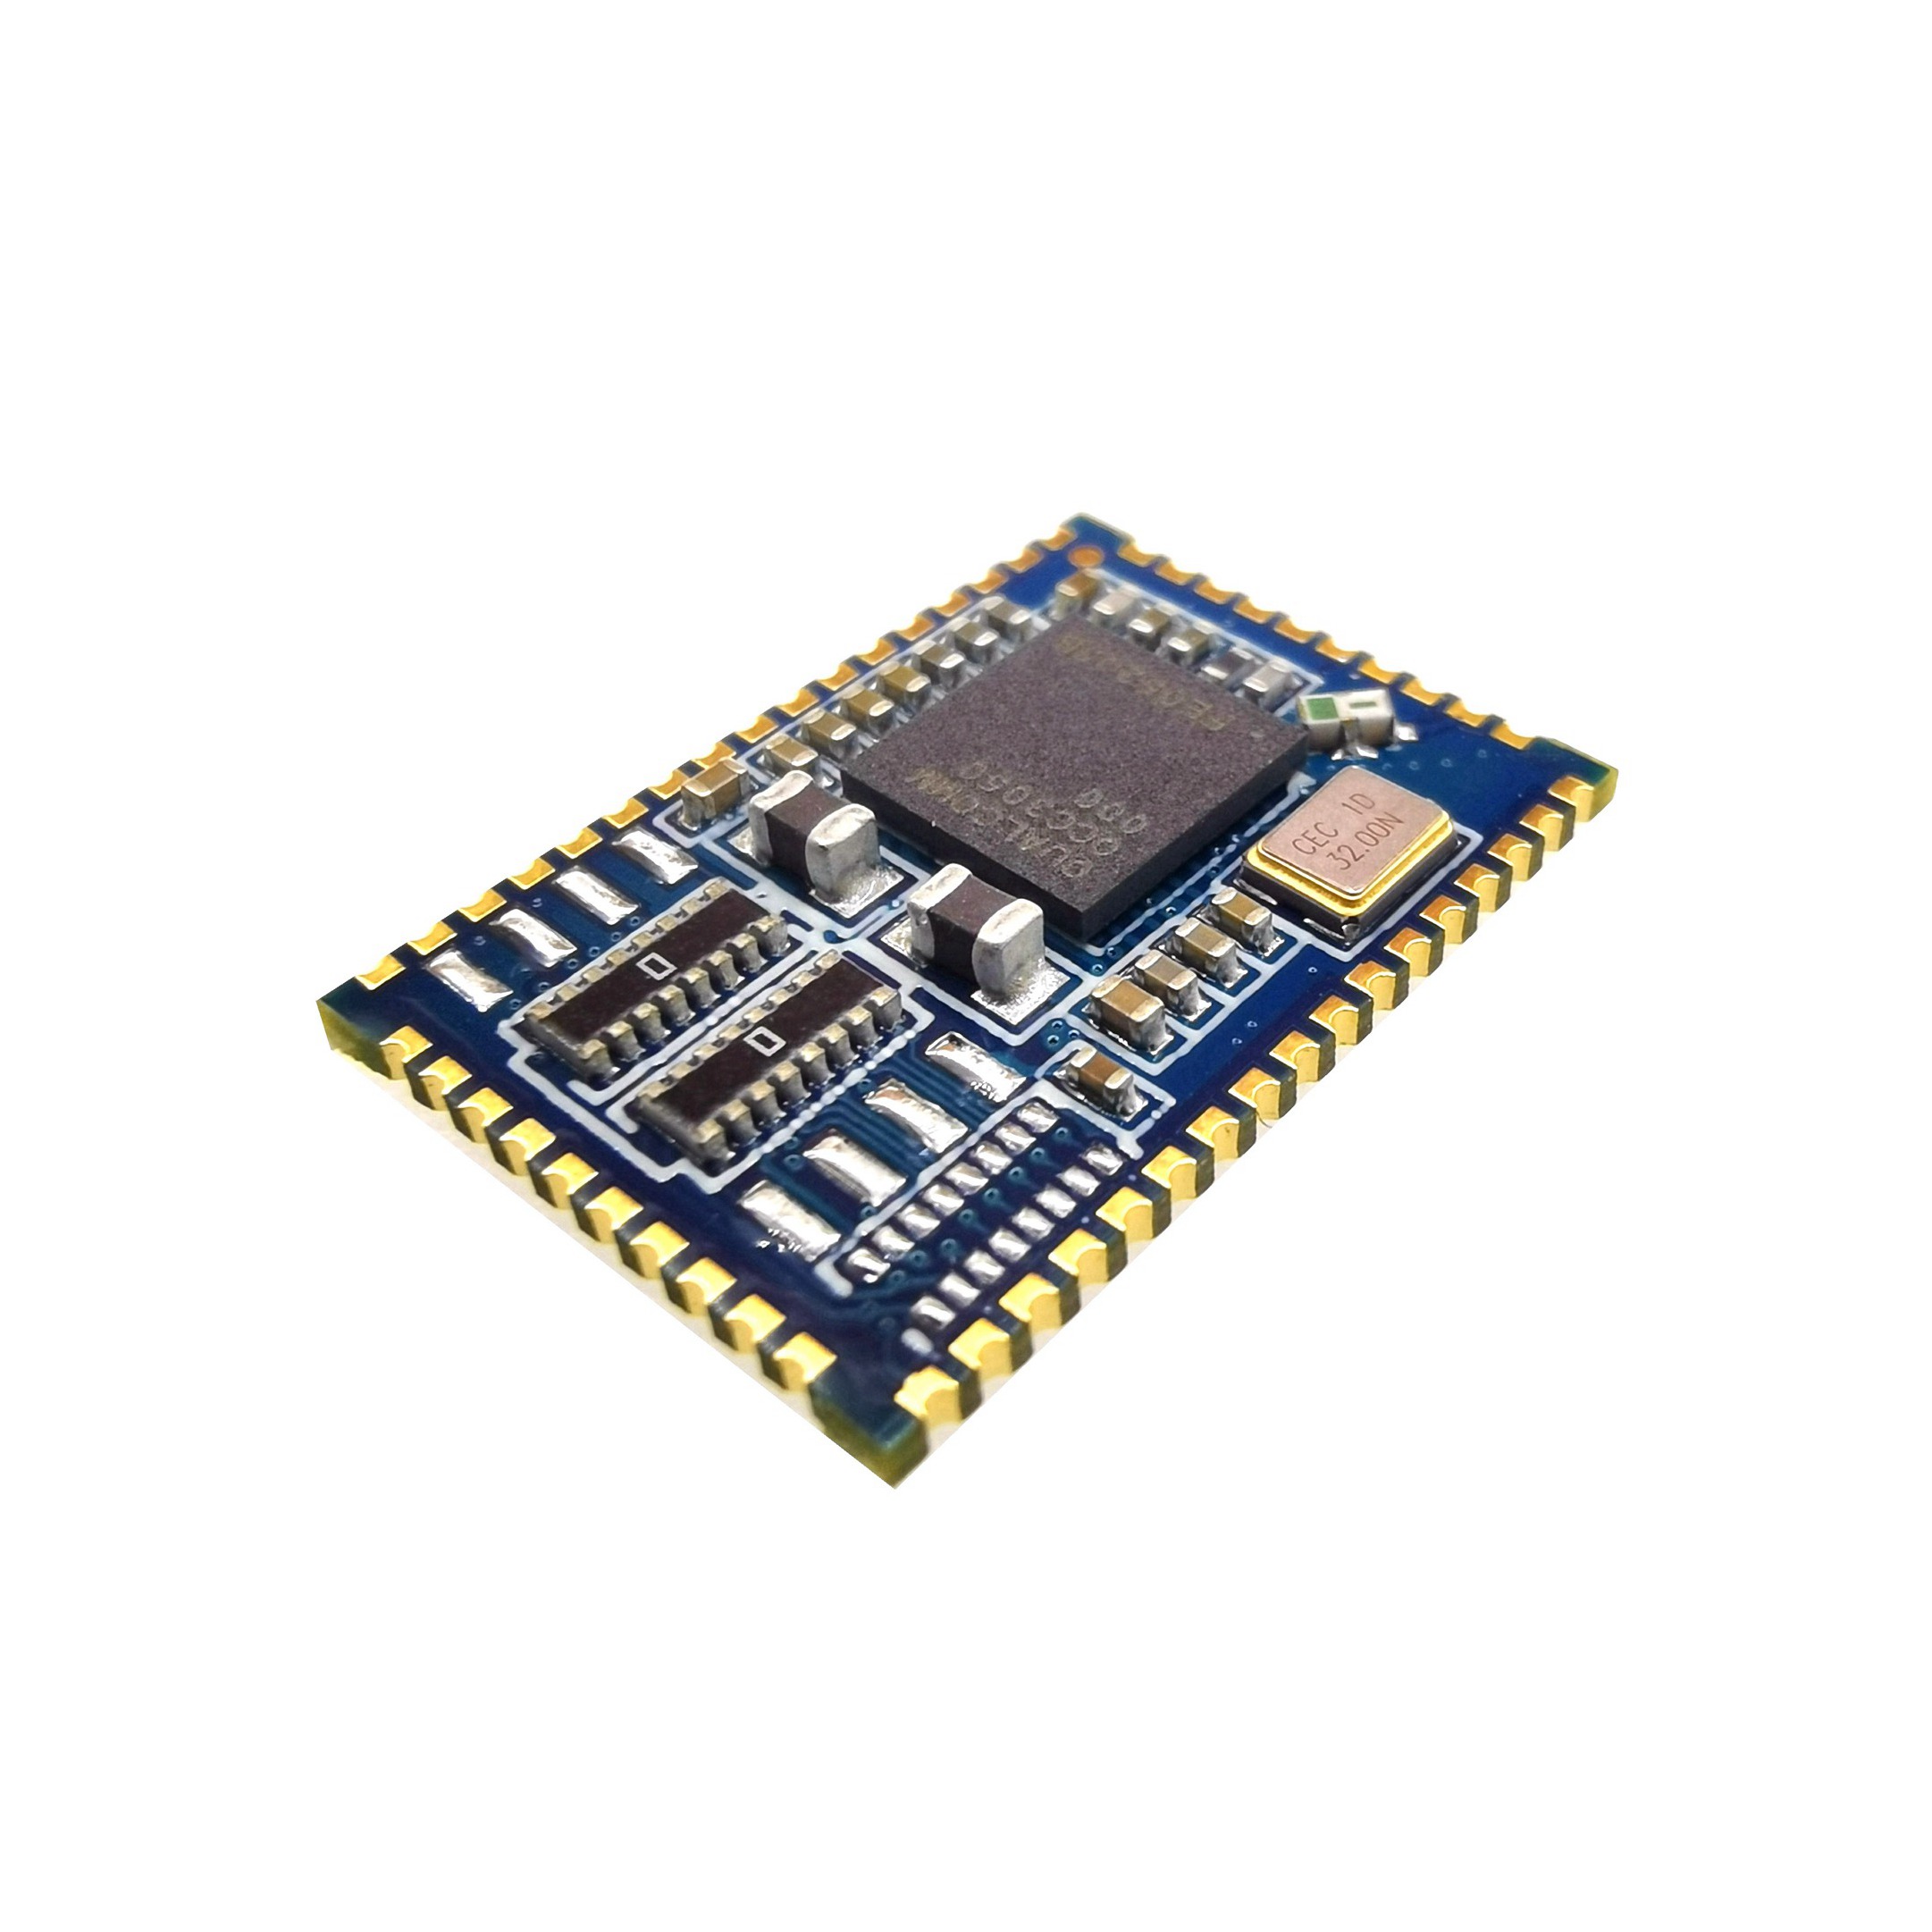 Introduction to BTM350 (QCC3050) Bluetooth module